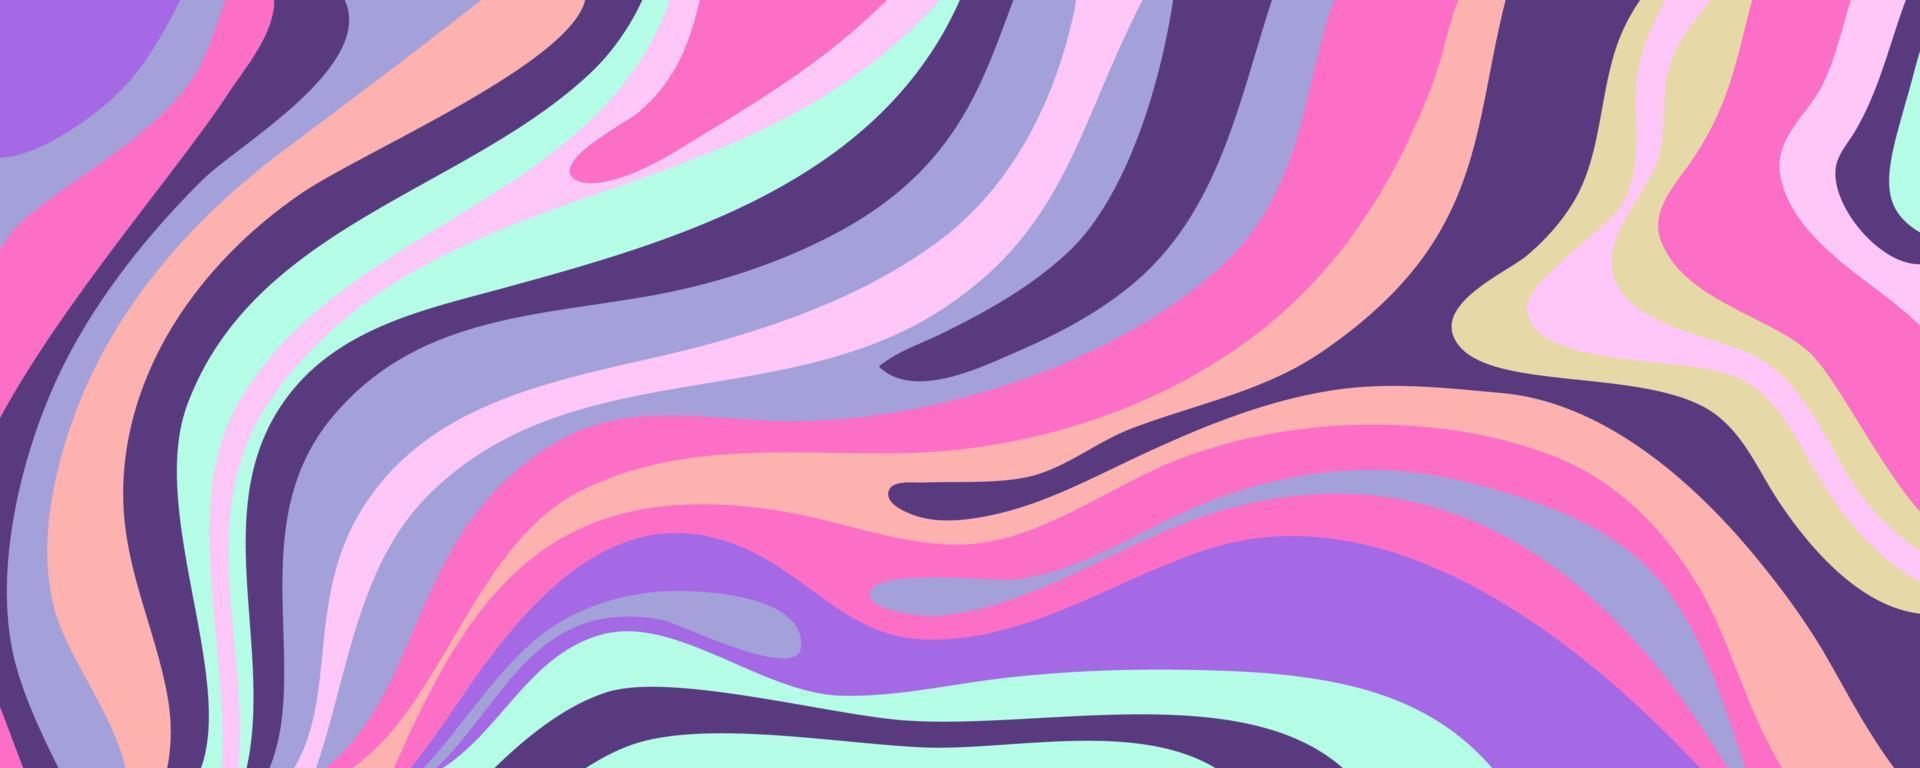 A colorful, abstract pattern with pink and purple - Y2K